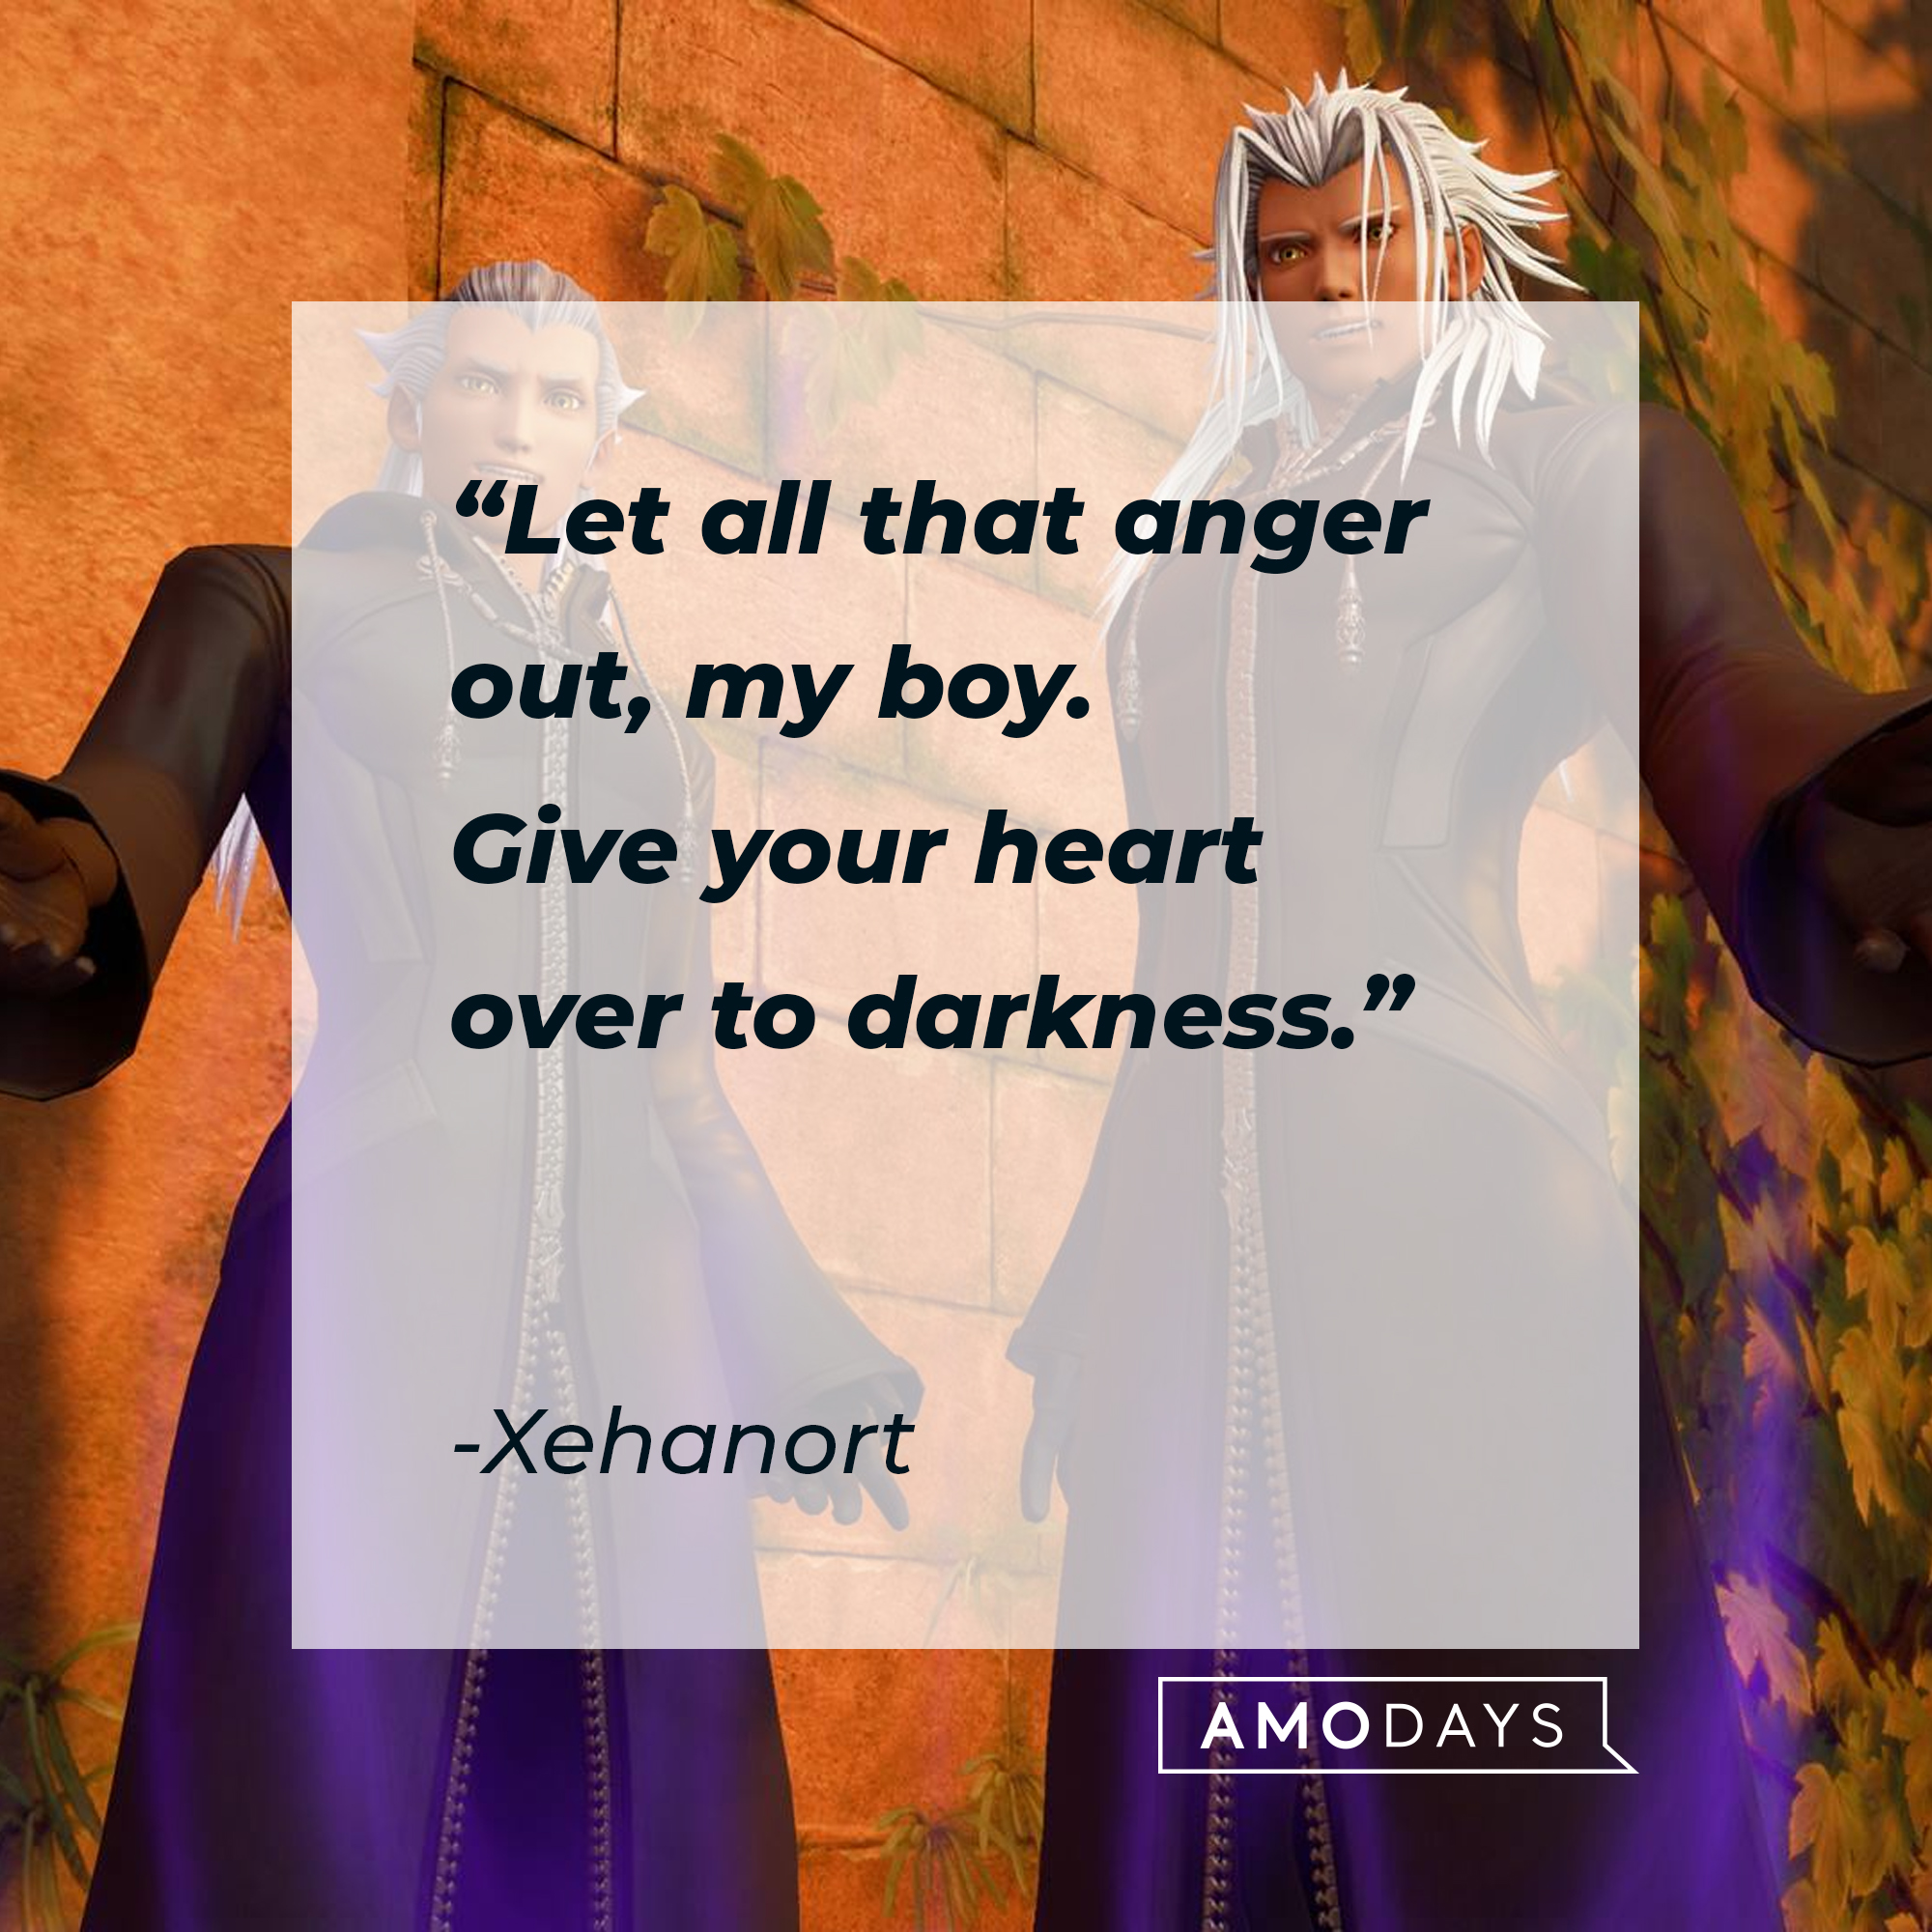 An image of Xehanort with his quote: “Let all that anger out, my boy. Give your heart over to darkness.” | Source: facebook.com/KingdomHearts